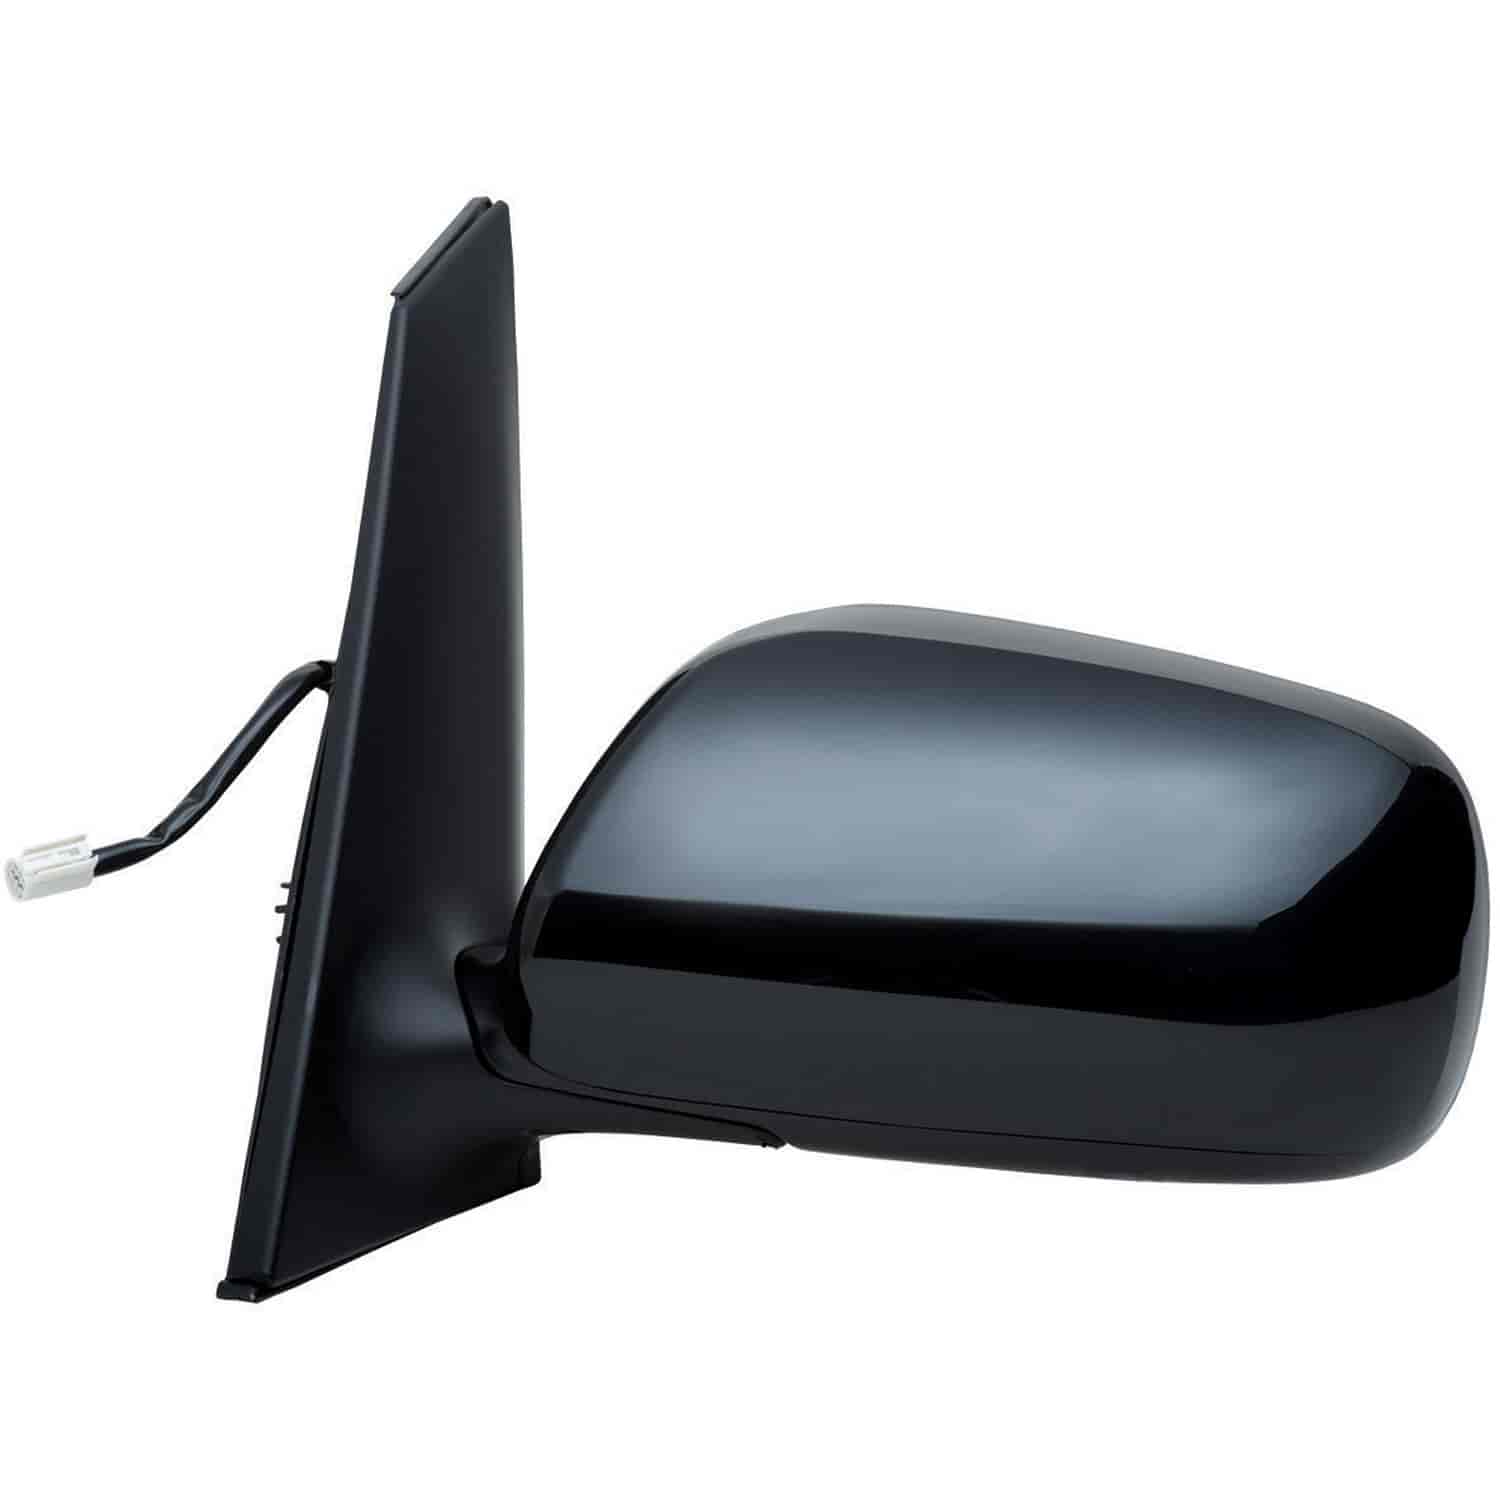 OEM Style Replacement mirror for 08-09 Toyota Prius driver side mirror tested to fit and function li